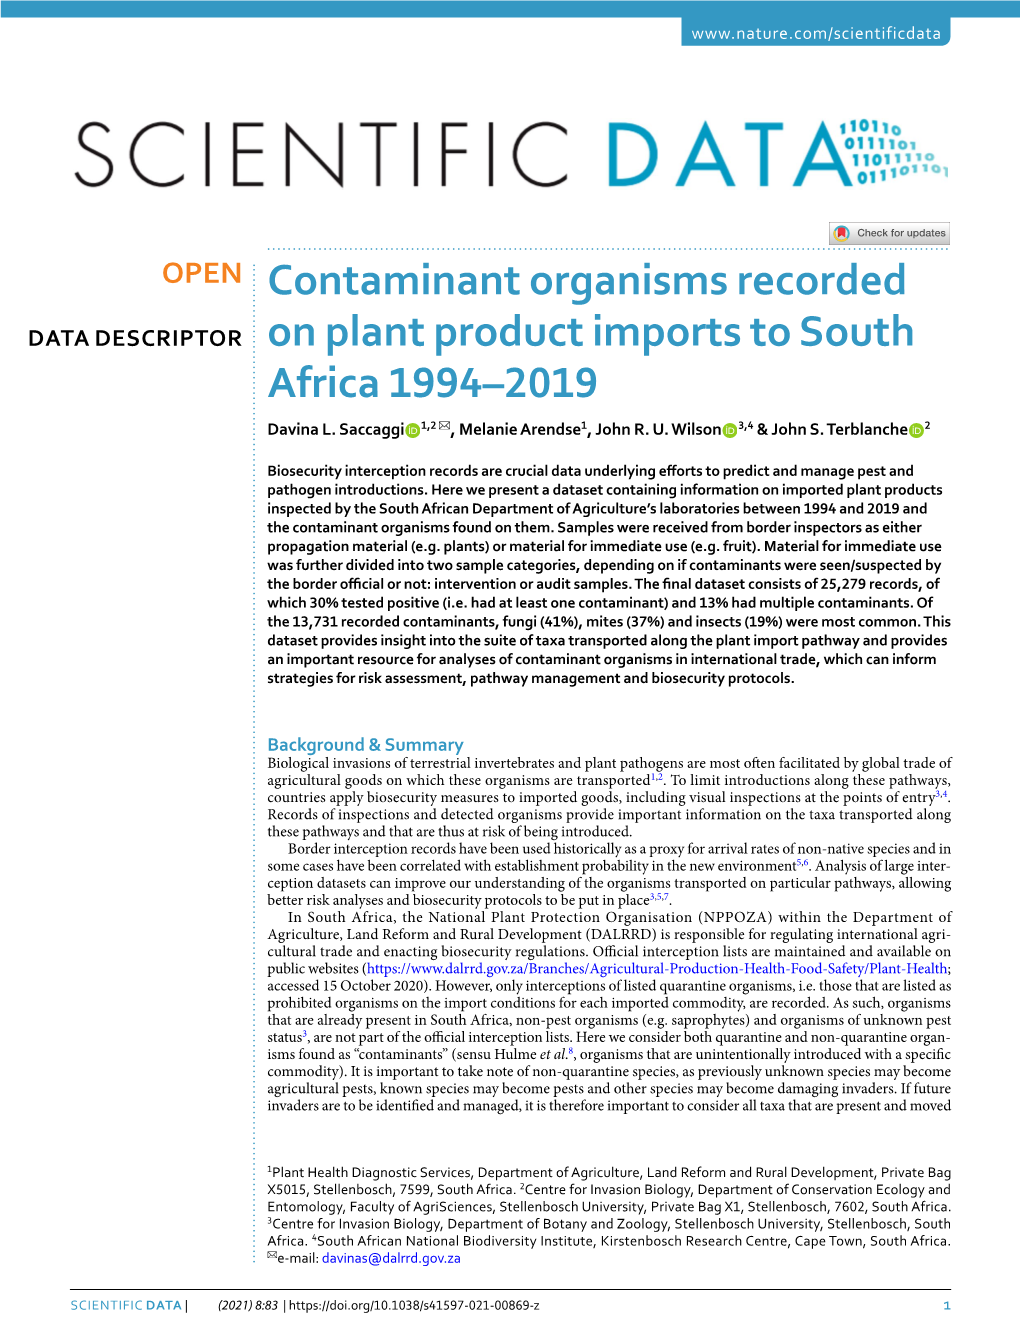 Contaminant Organisms Recorded on Plant Product Imports to South Africa 1994–2019